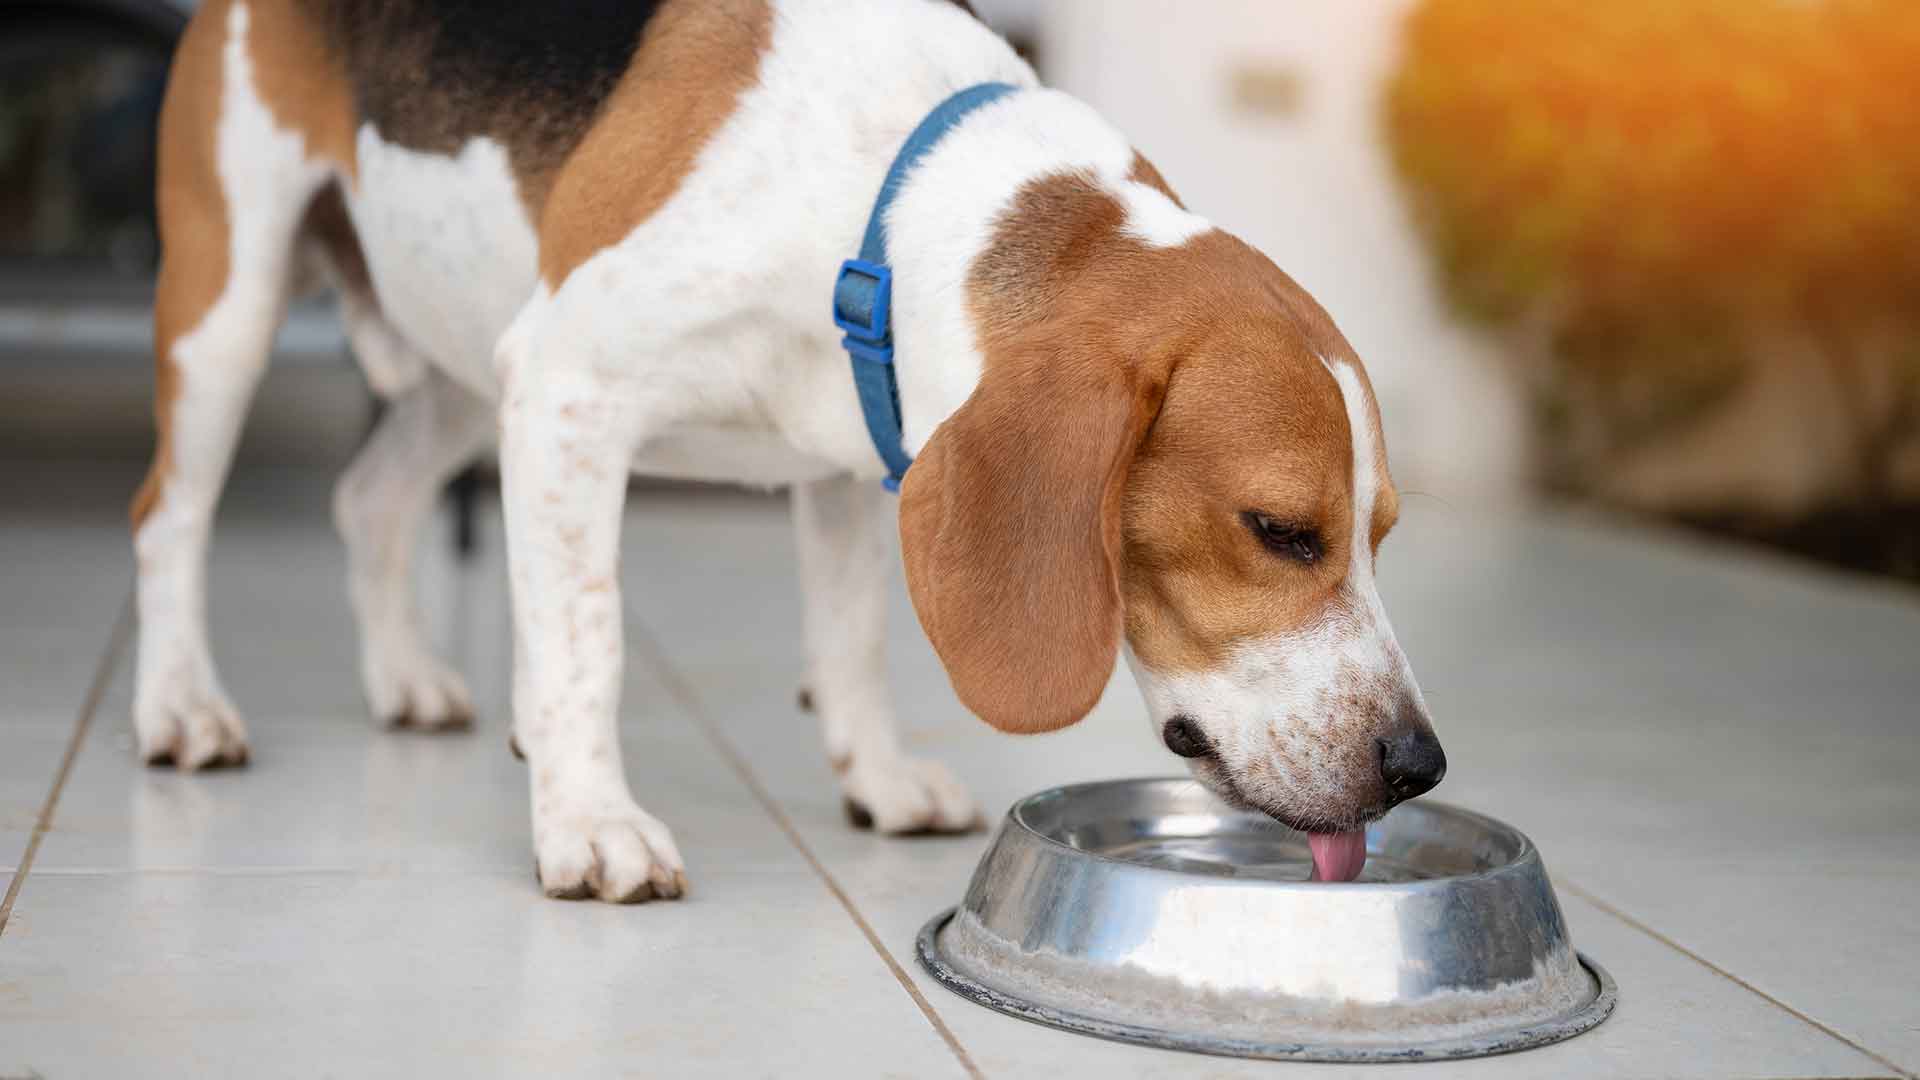 A beagle drinking out of a dog water bowl